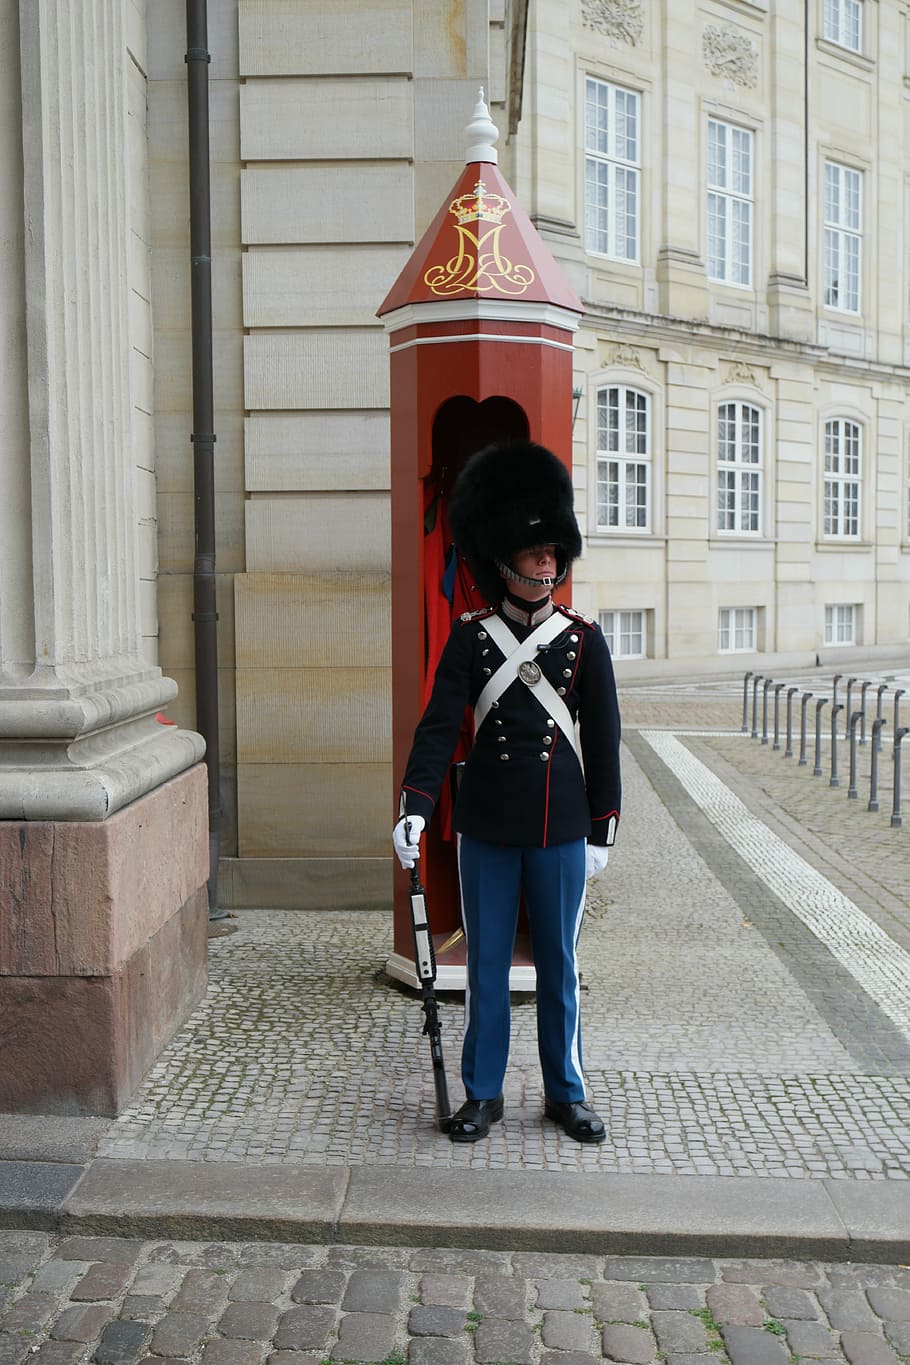 amalienborg, royal castle, royal guard, copenhagen, attraction, security, tradition, palace, changing of the guard, army